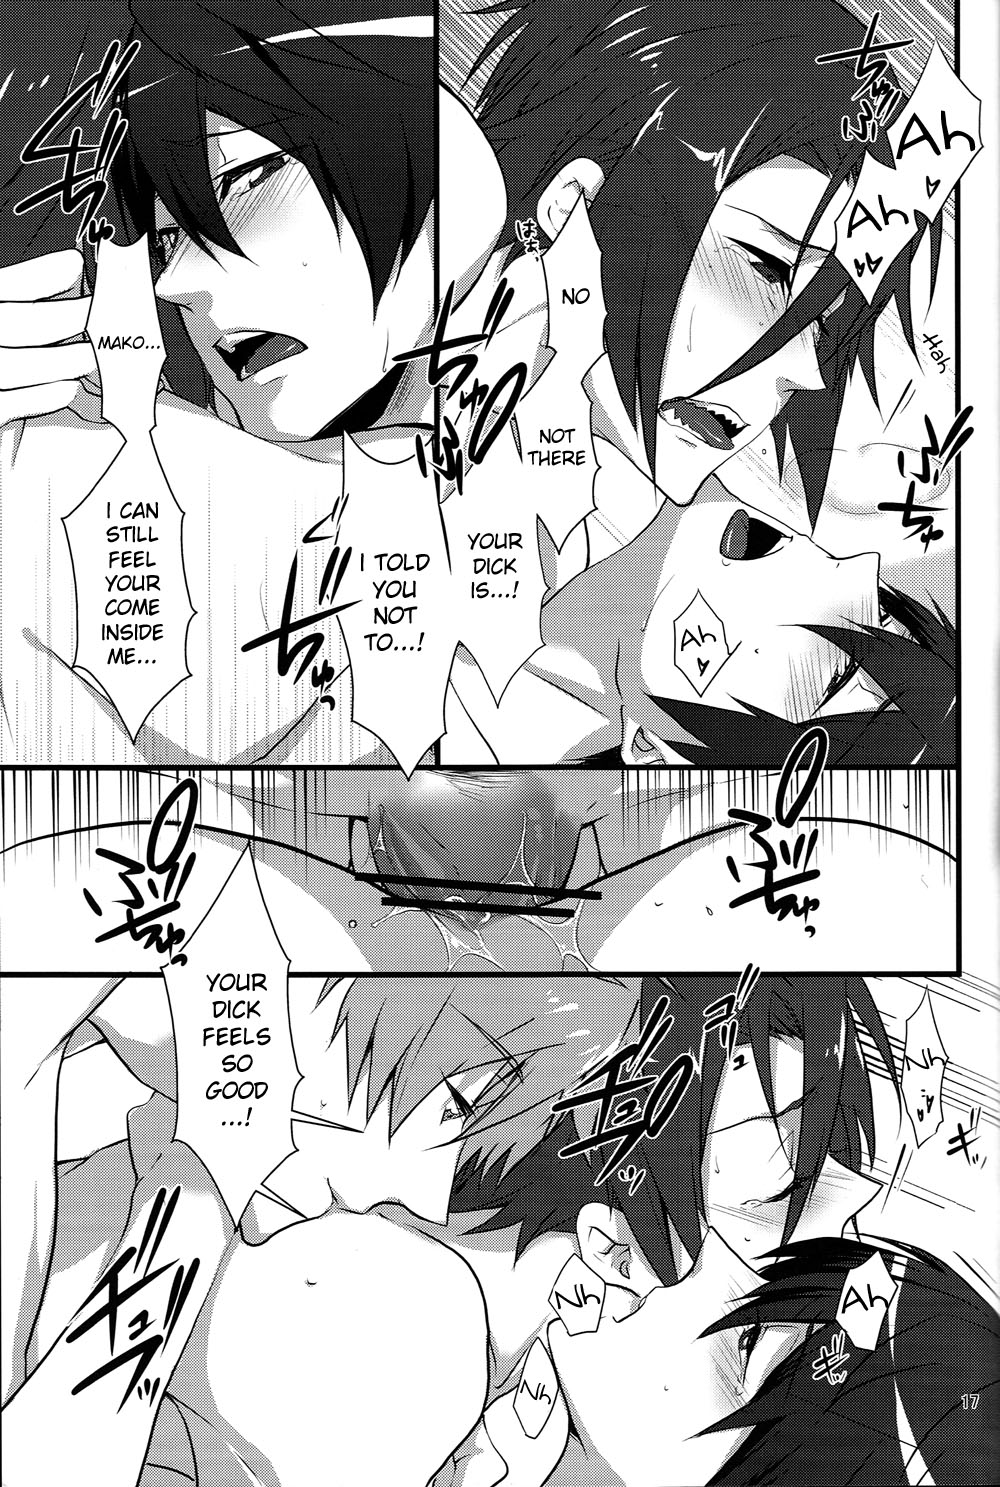 [Gyoukou (Yaki Rio)] HAPPY DAY? (Free!) [English] [Moy Moe Scans] page 16 full